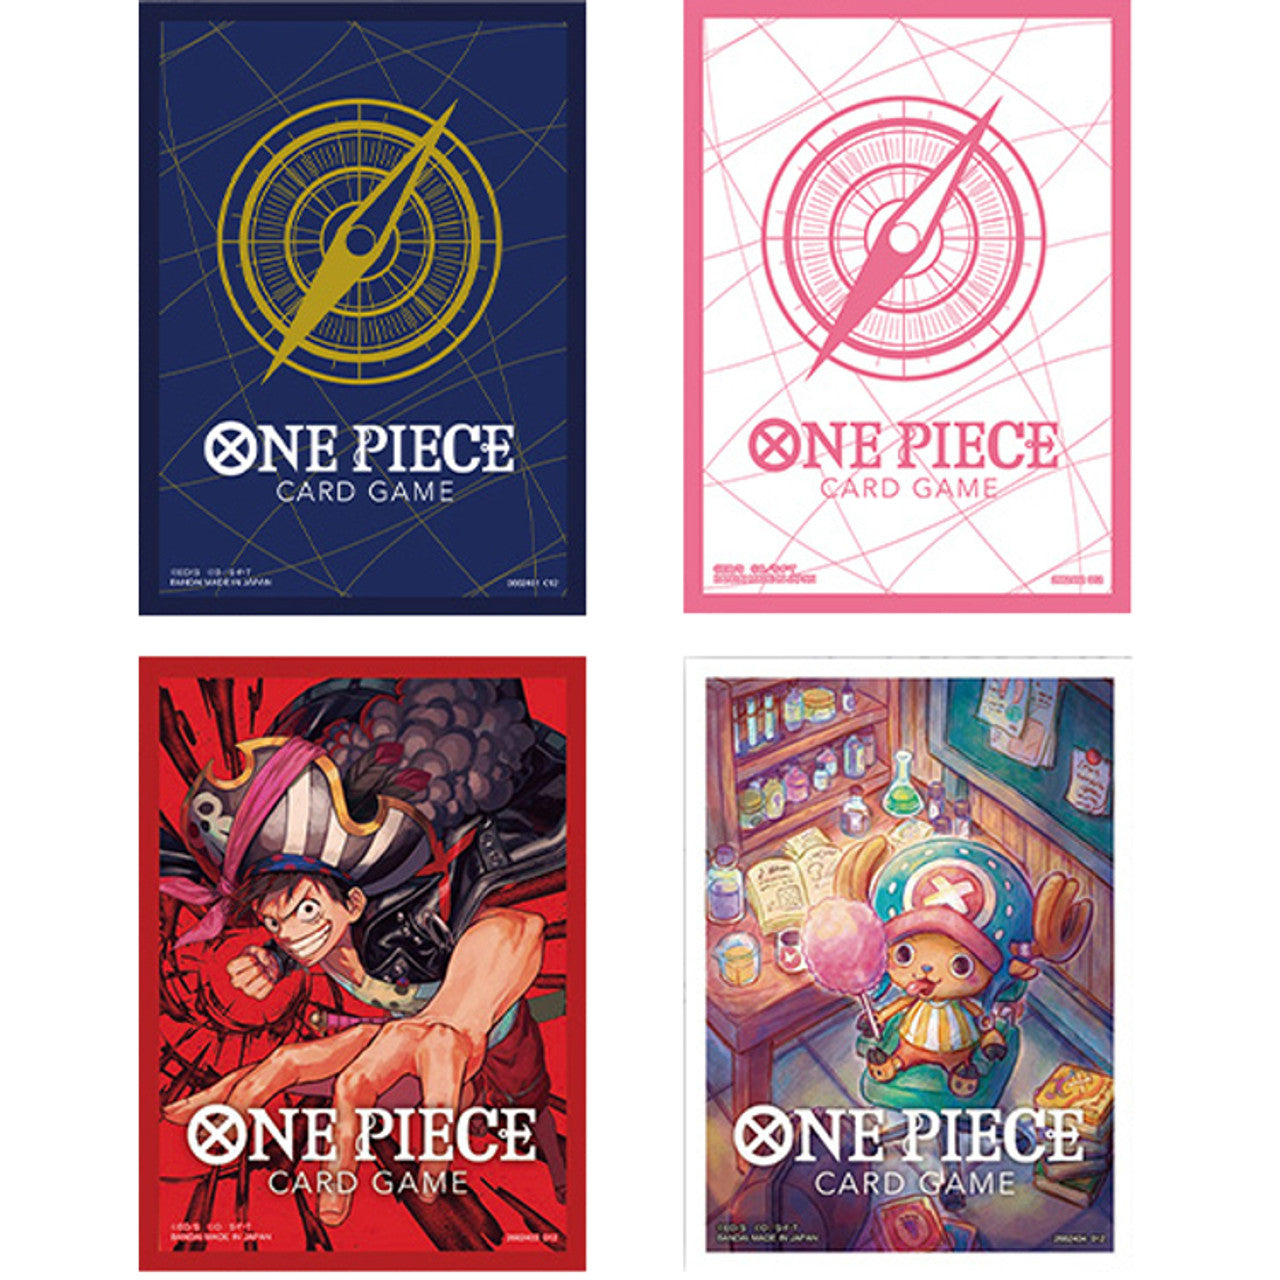 One Piece Card Game: Official Card Sleeve Set 2